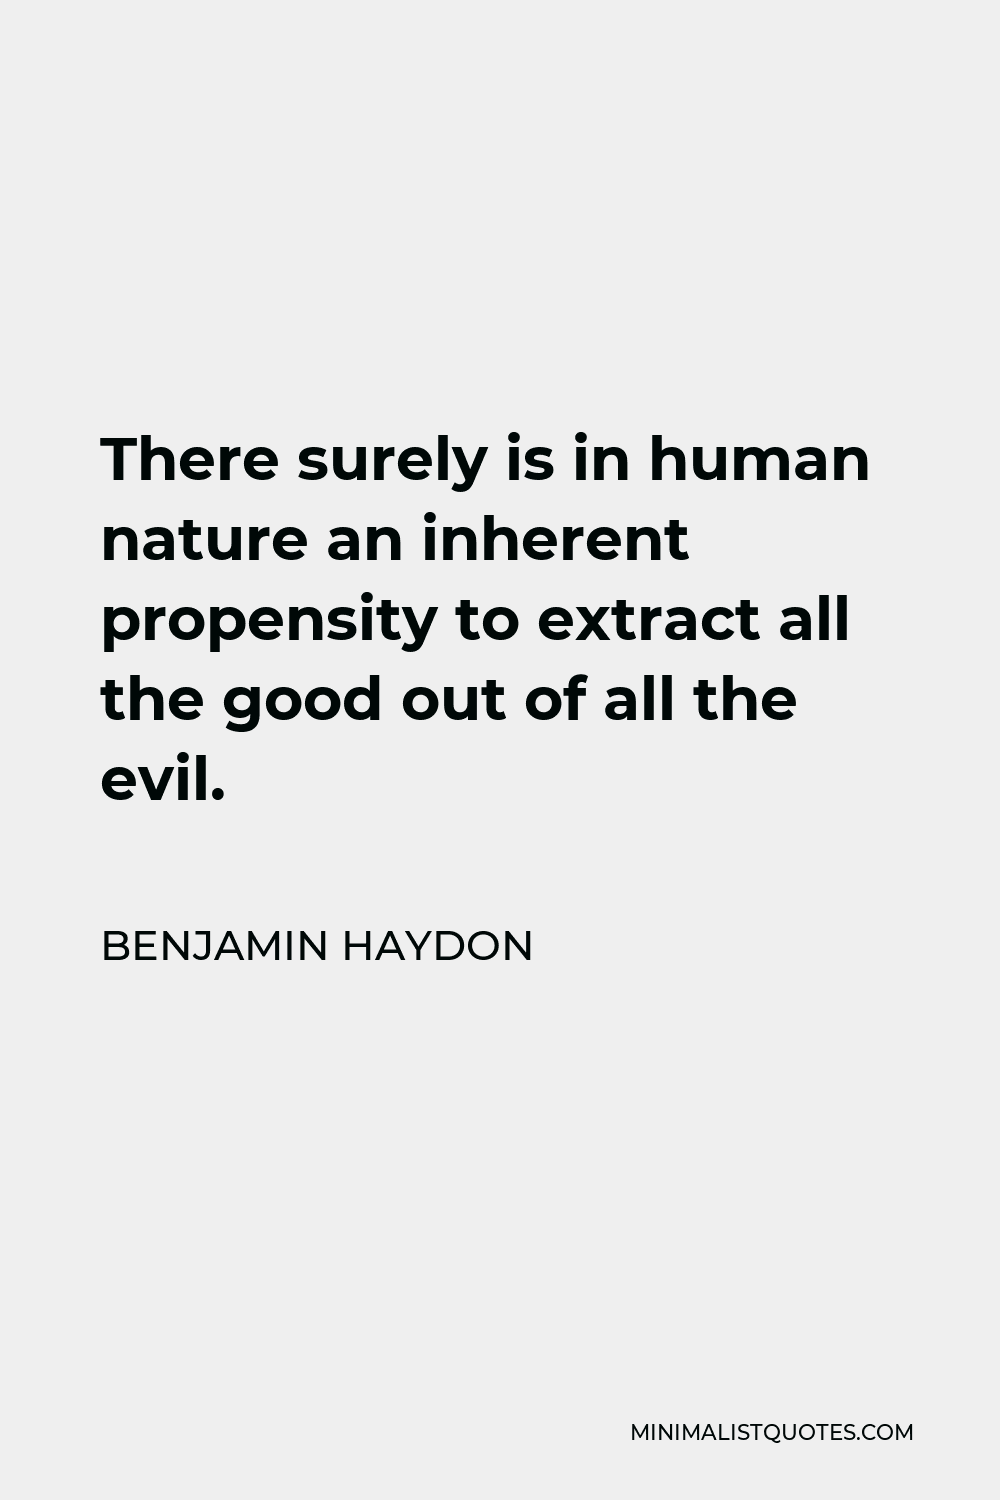 Benjamin Haydon Quote - There surely is in human nature an inherent propensity to extract all the good out of all the evil.